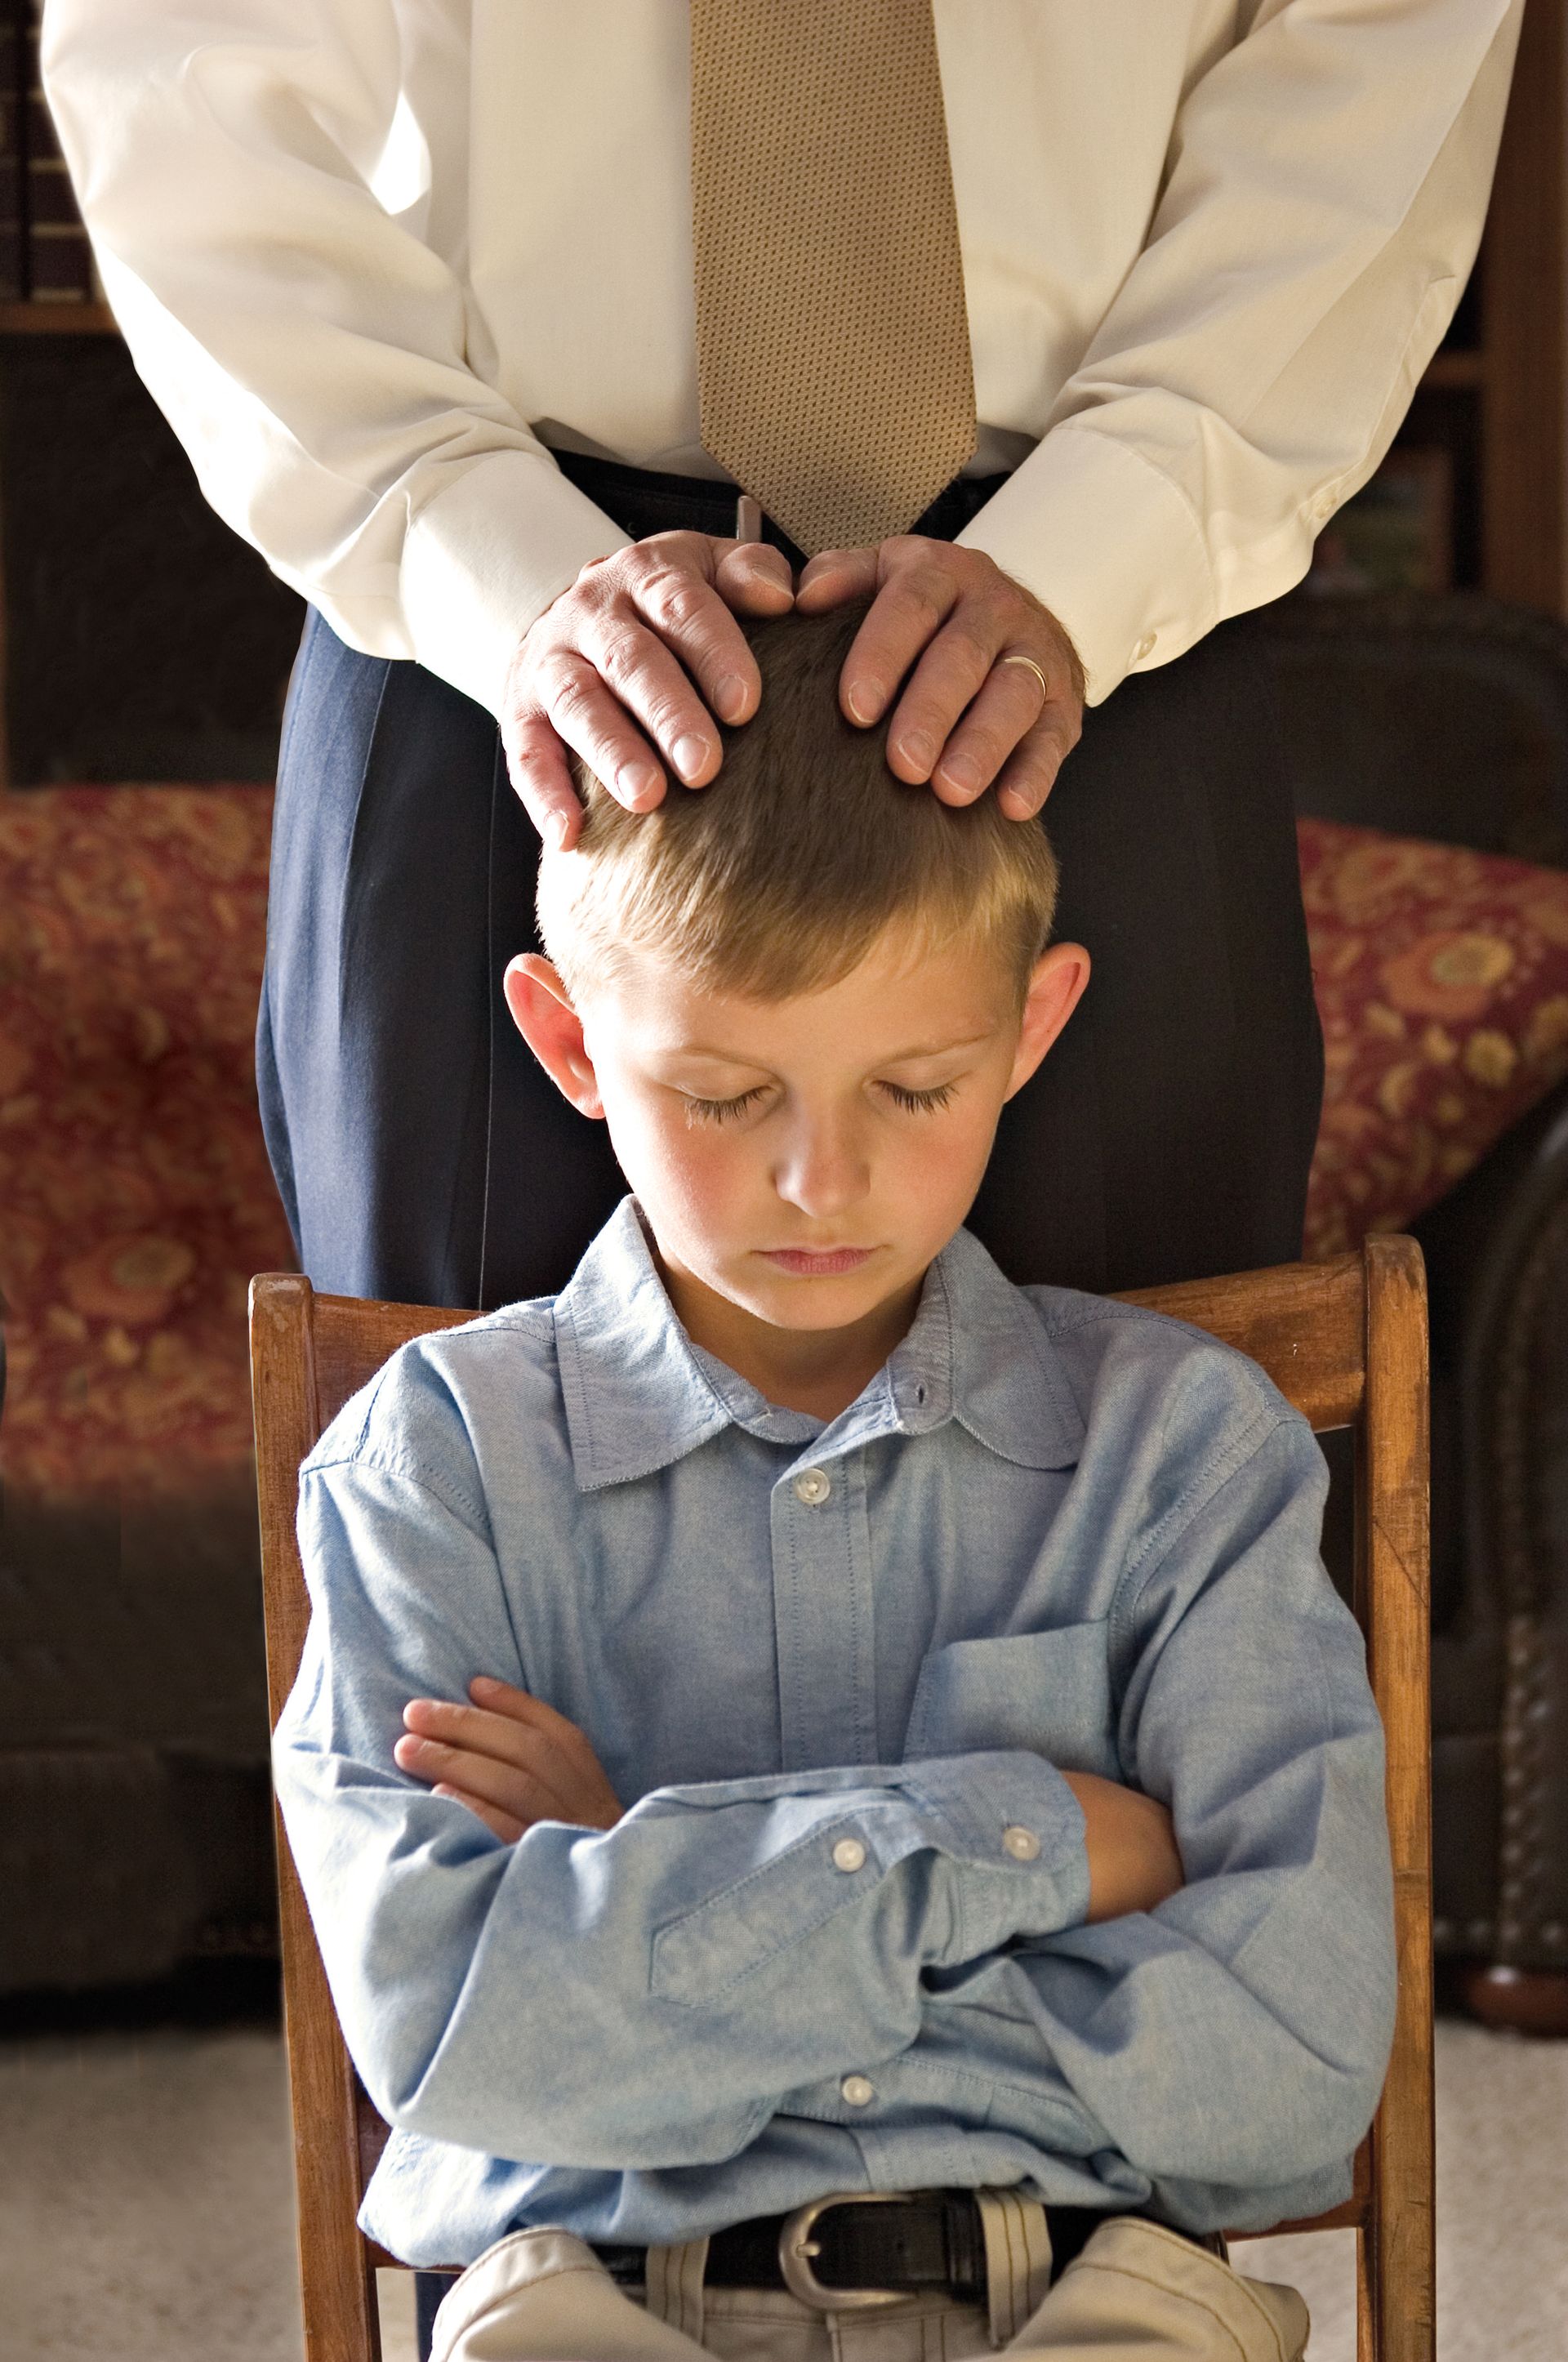 A father gives his son a priesthood blessing.